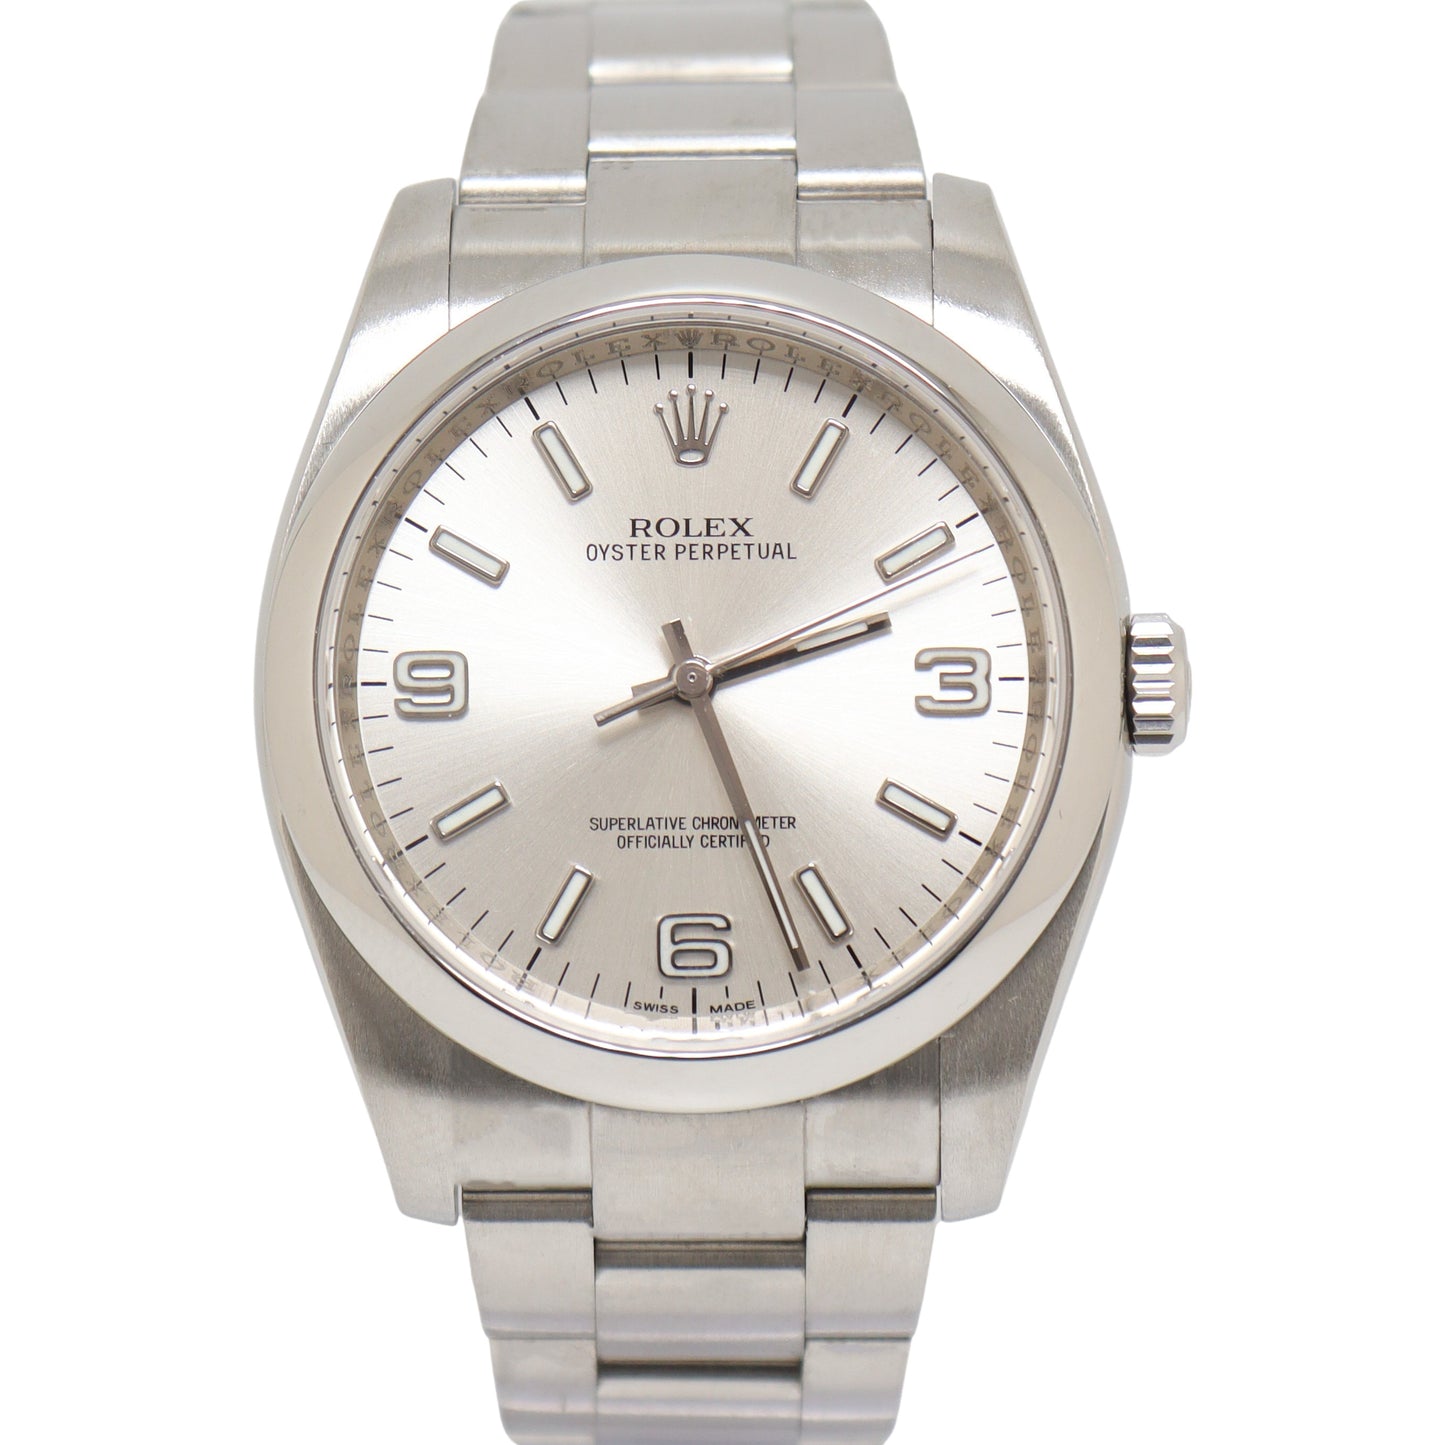 Rolex Oyster Perpetual Stainless Steel 36mm Silver Stick Dial Watch Reference#: 116000 - Happy Jewelers Fine Jewelry Lifetime Warranty